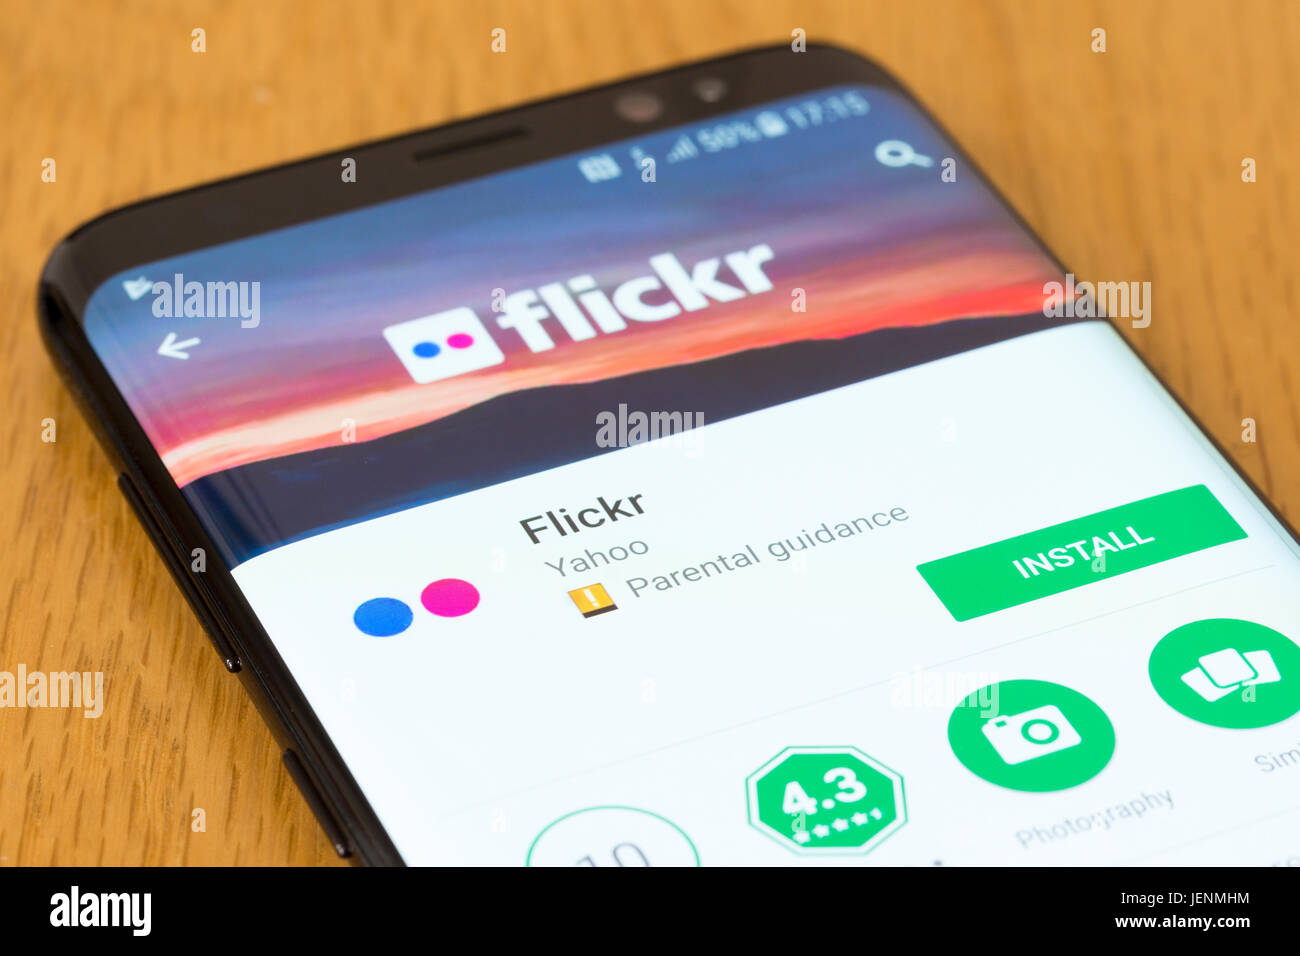 A closeup on the Flickr app install screen on a smartphone Stock Photo